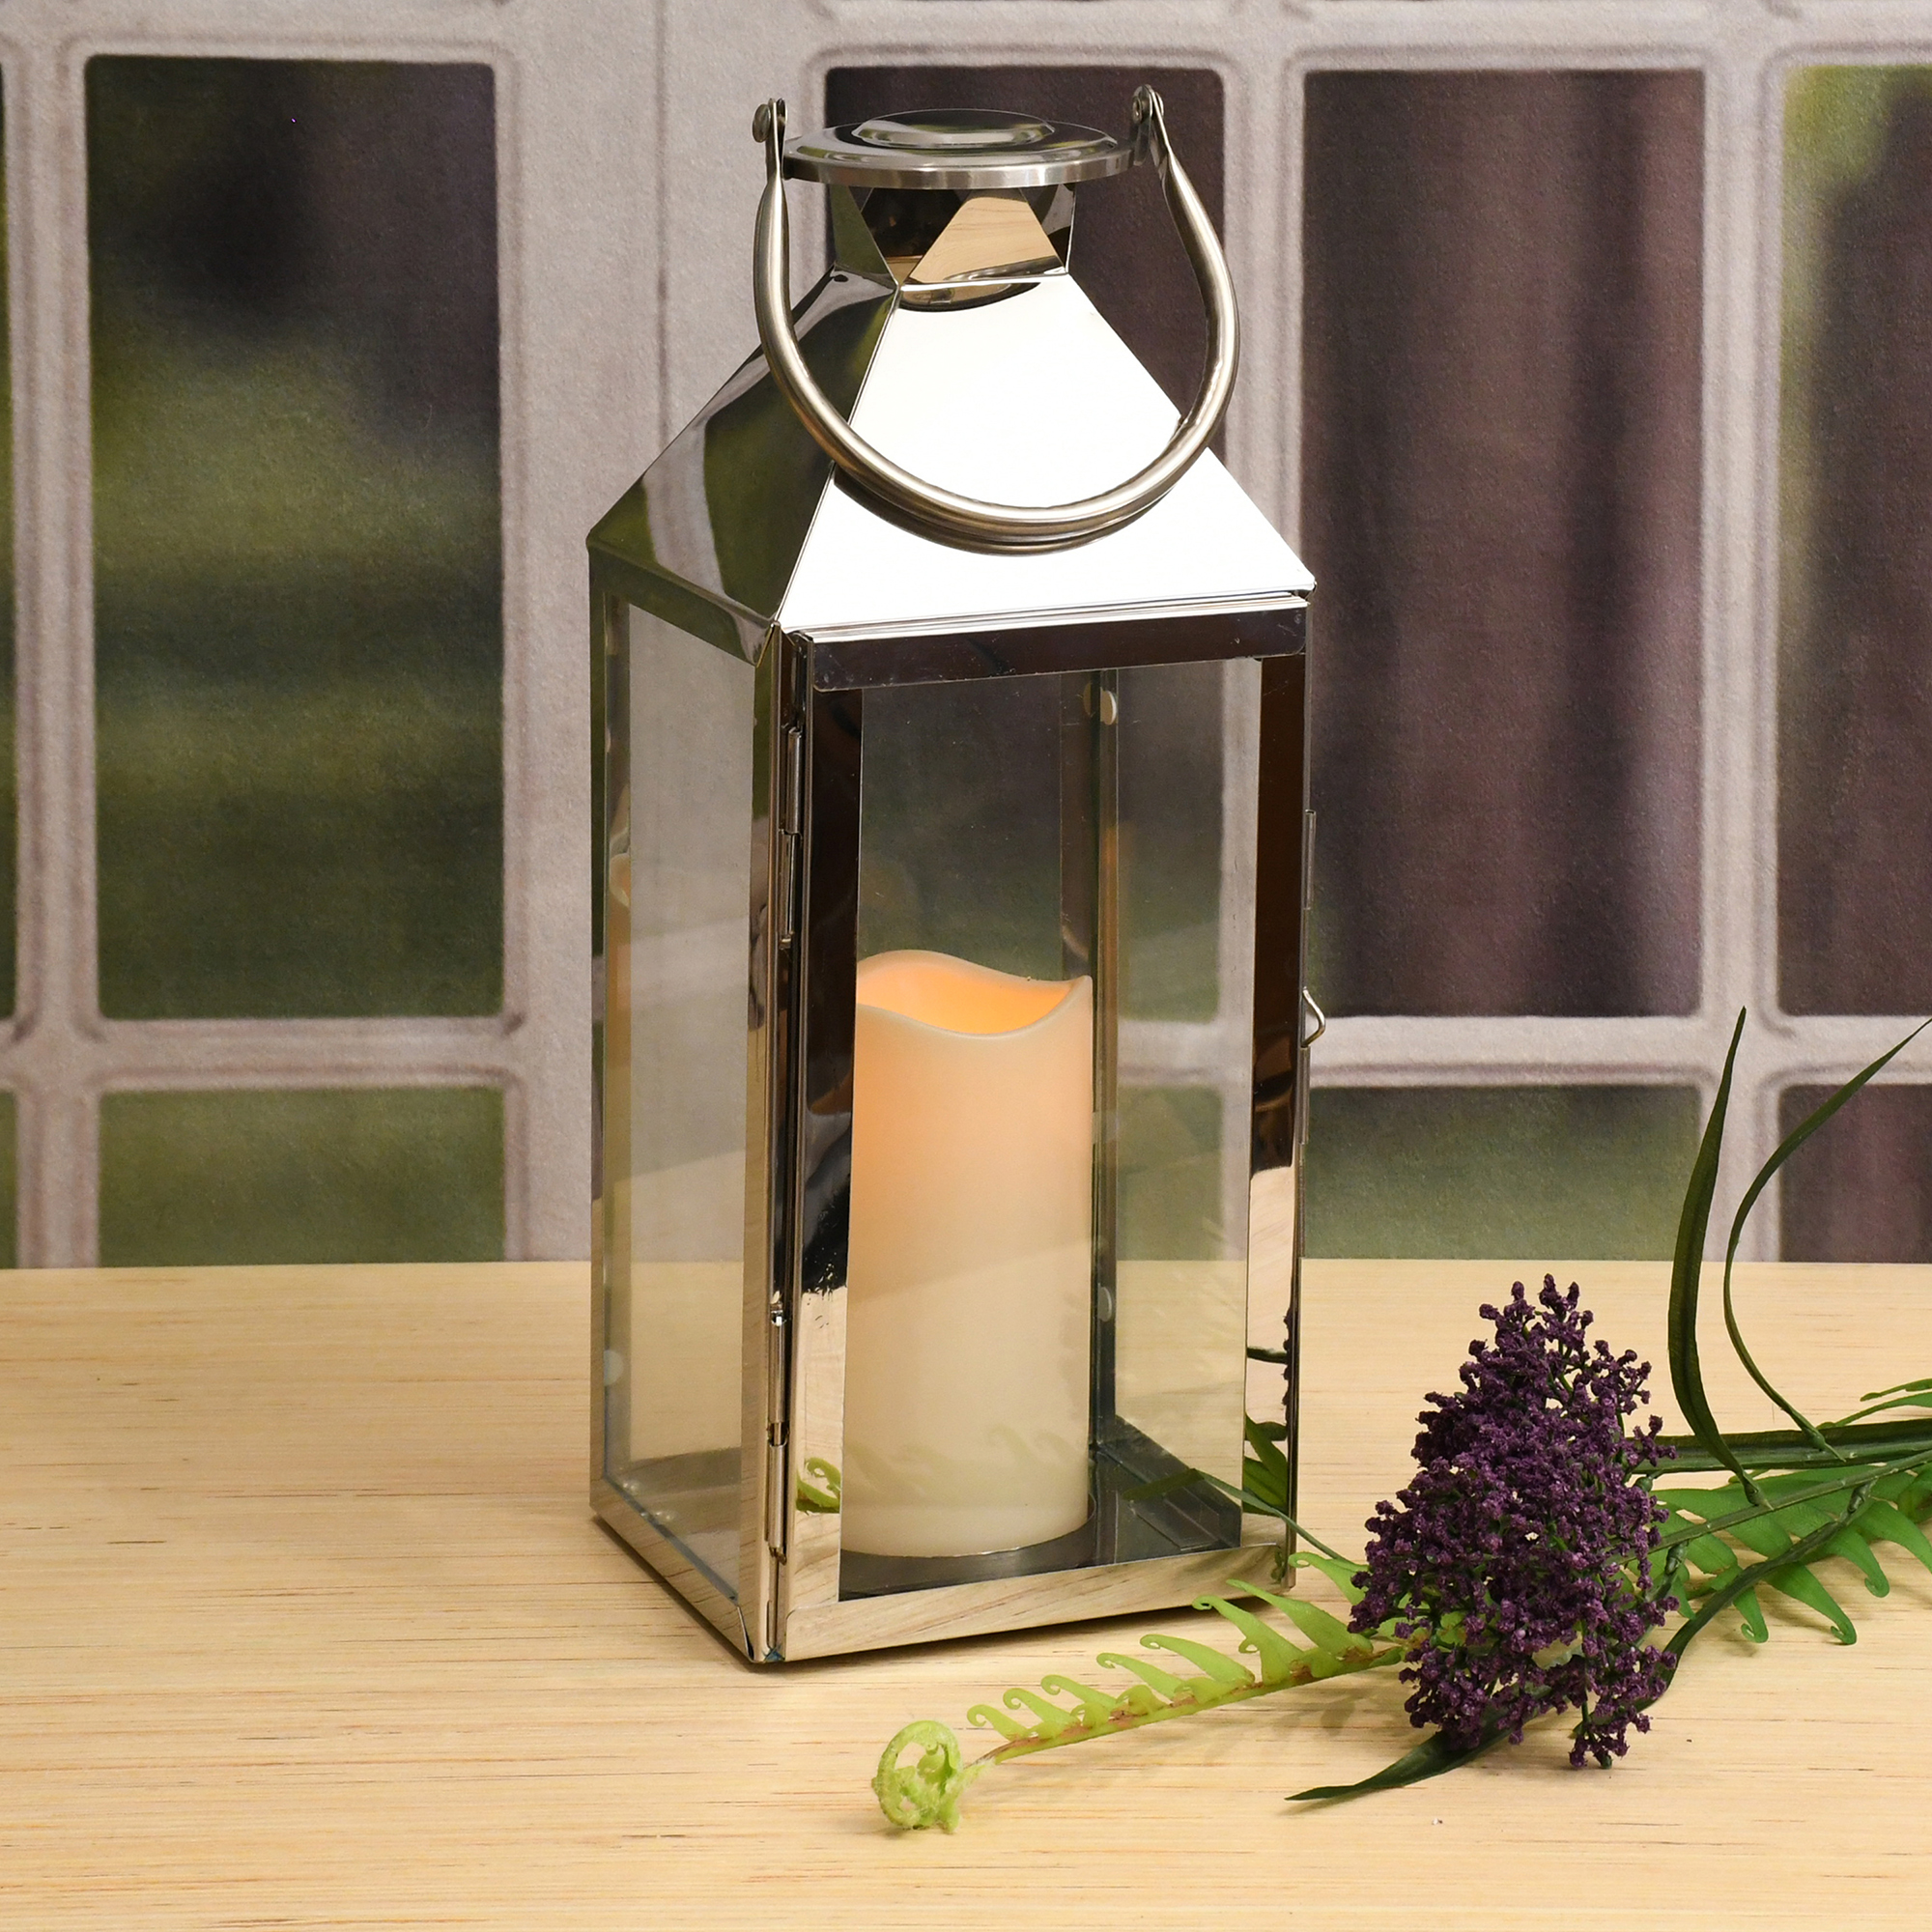 Large Glass Chrome Lantern With Rope Handle Led Flickering Candle Effect 